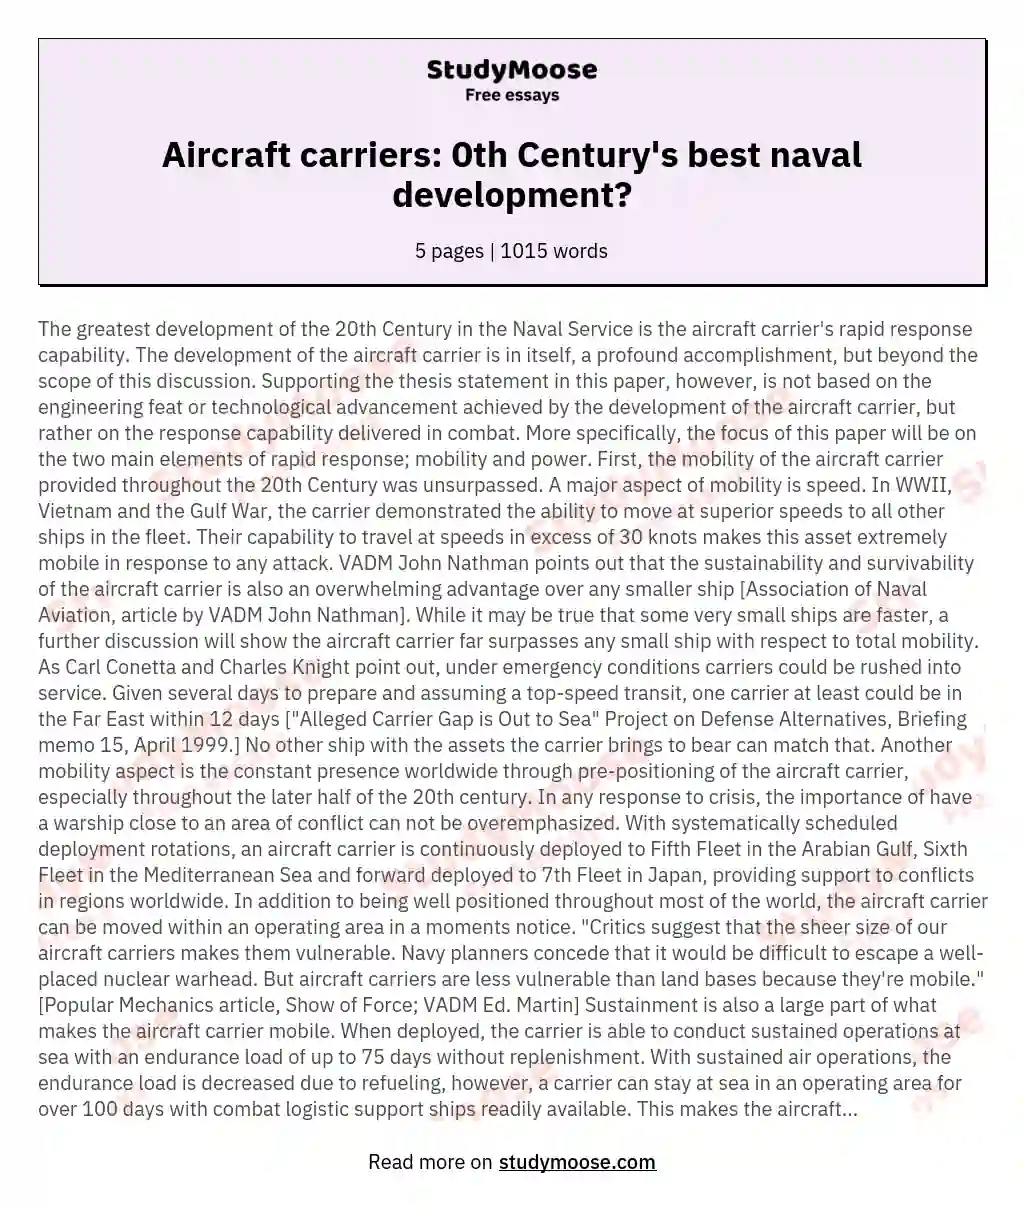 The greatest development of the 20th Century in the Naval Service is the aircraft carrier's rapid response capability